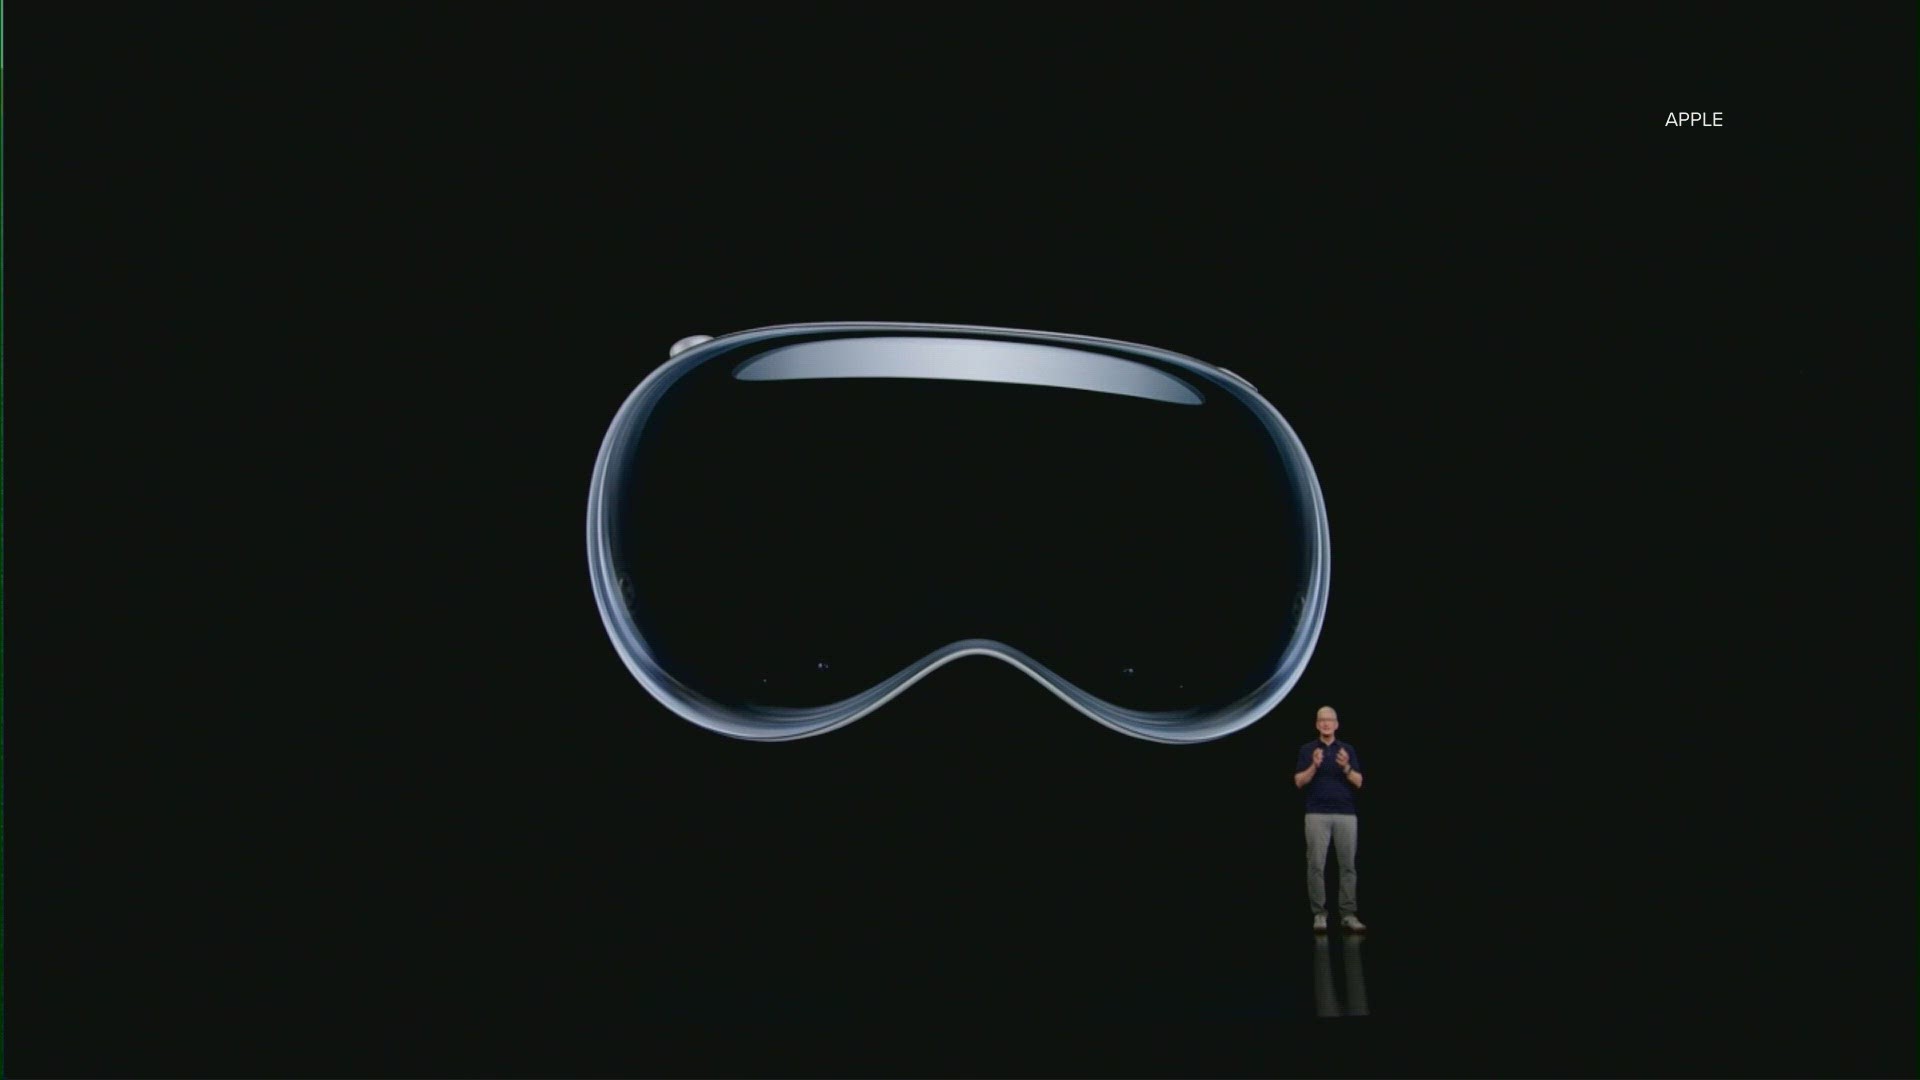 After years of speculation, Apple CEO Tim Cook hailed the arrival of the sleek goggles.